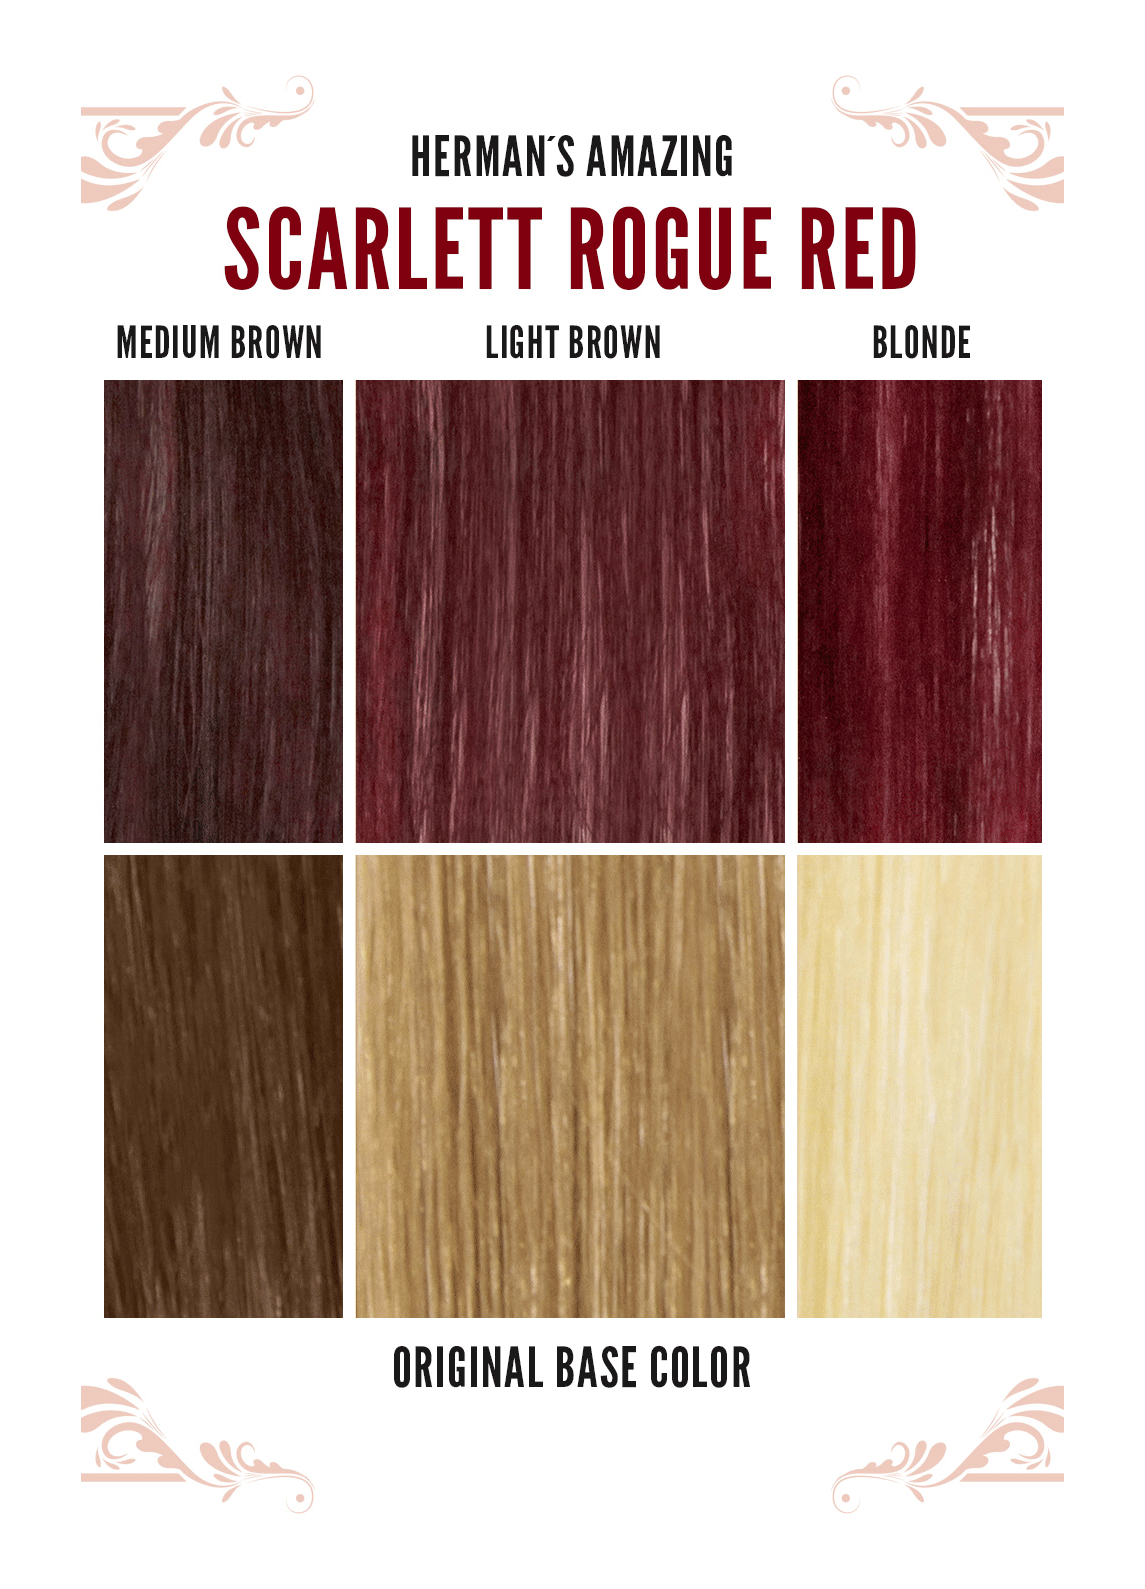 Herman's Amazing Direct Hair Colour - Scarlett Rouge Red - Kate's Clothing